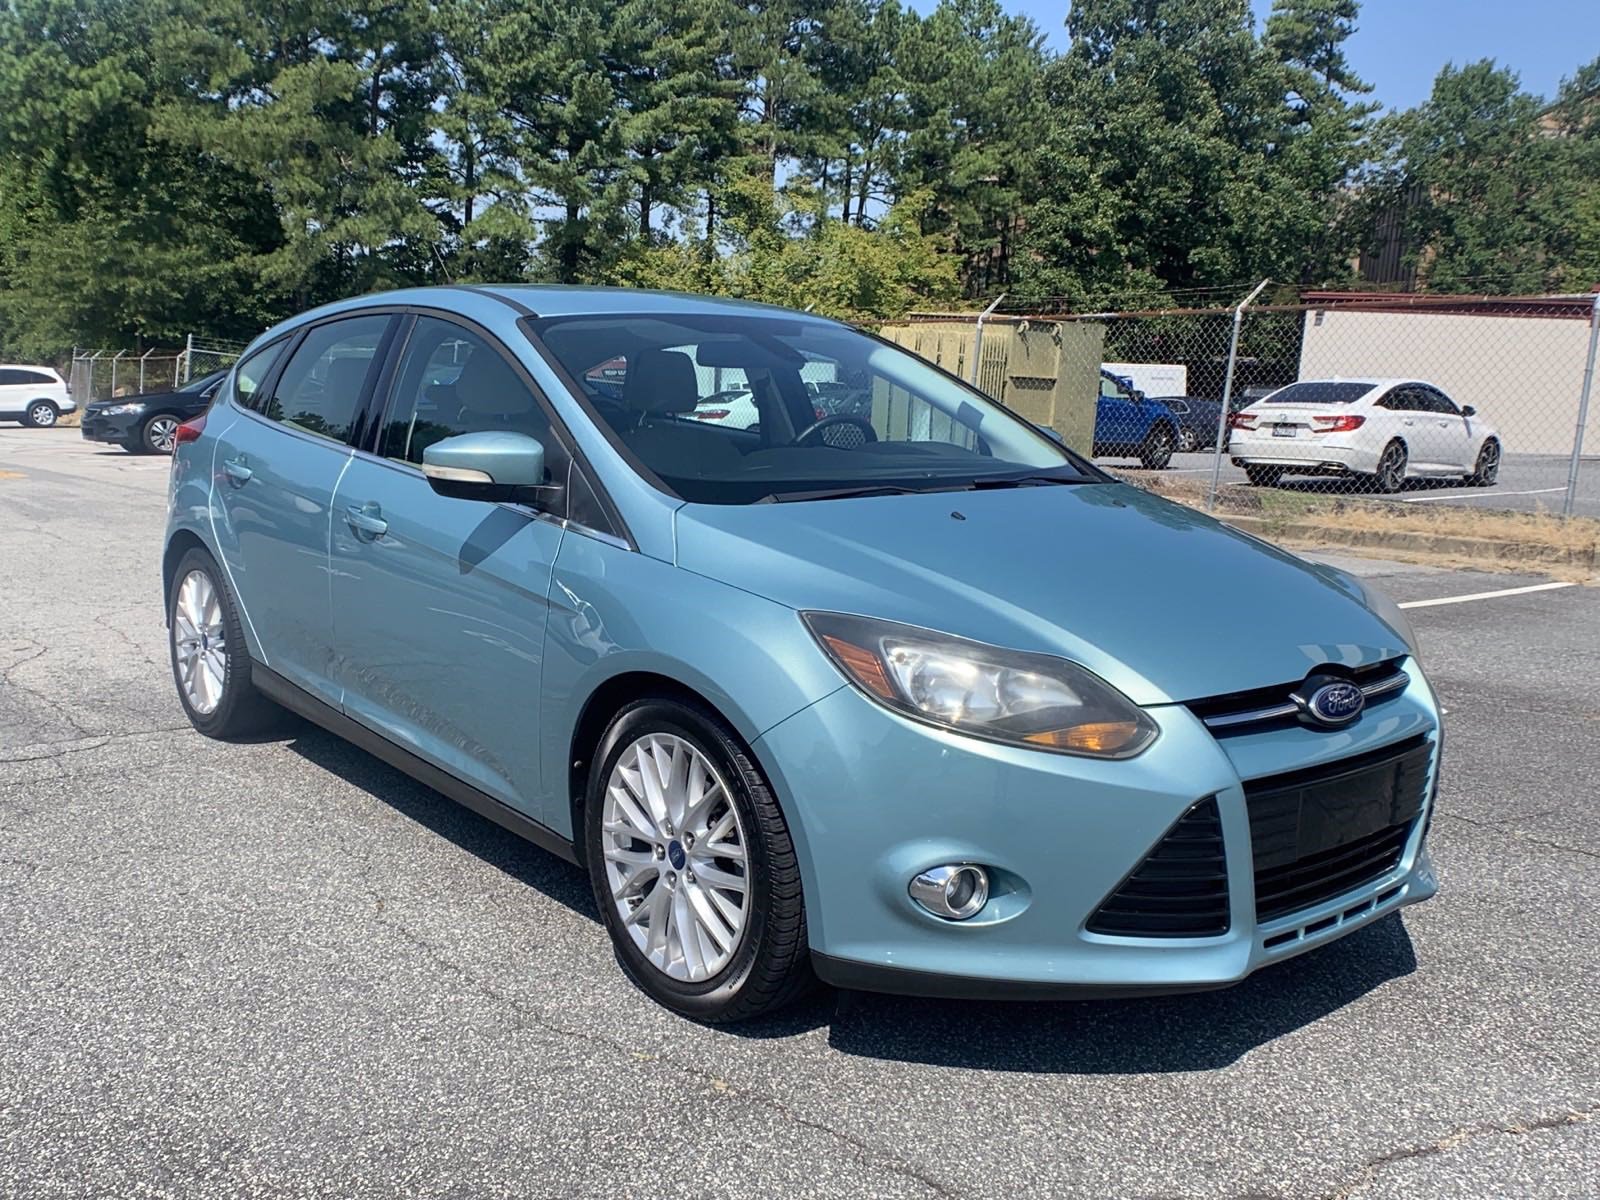 PreOwned 2012 Ford Focus SEL Hatchback in 287656A Ed